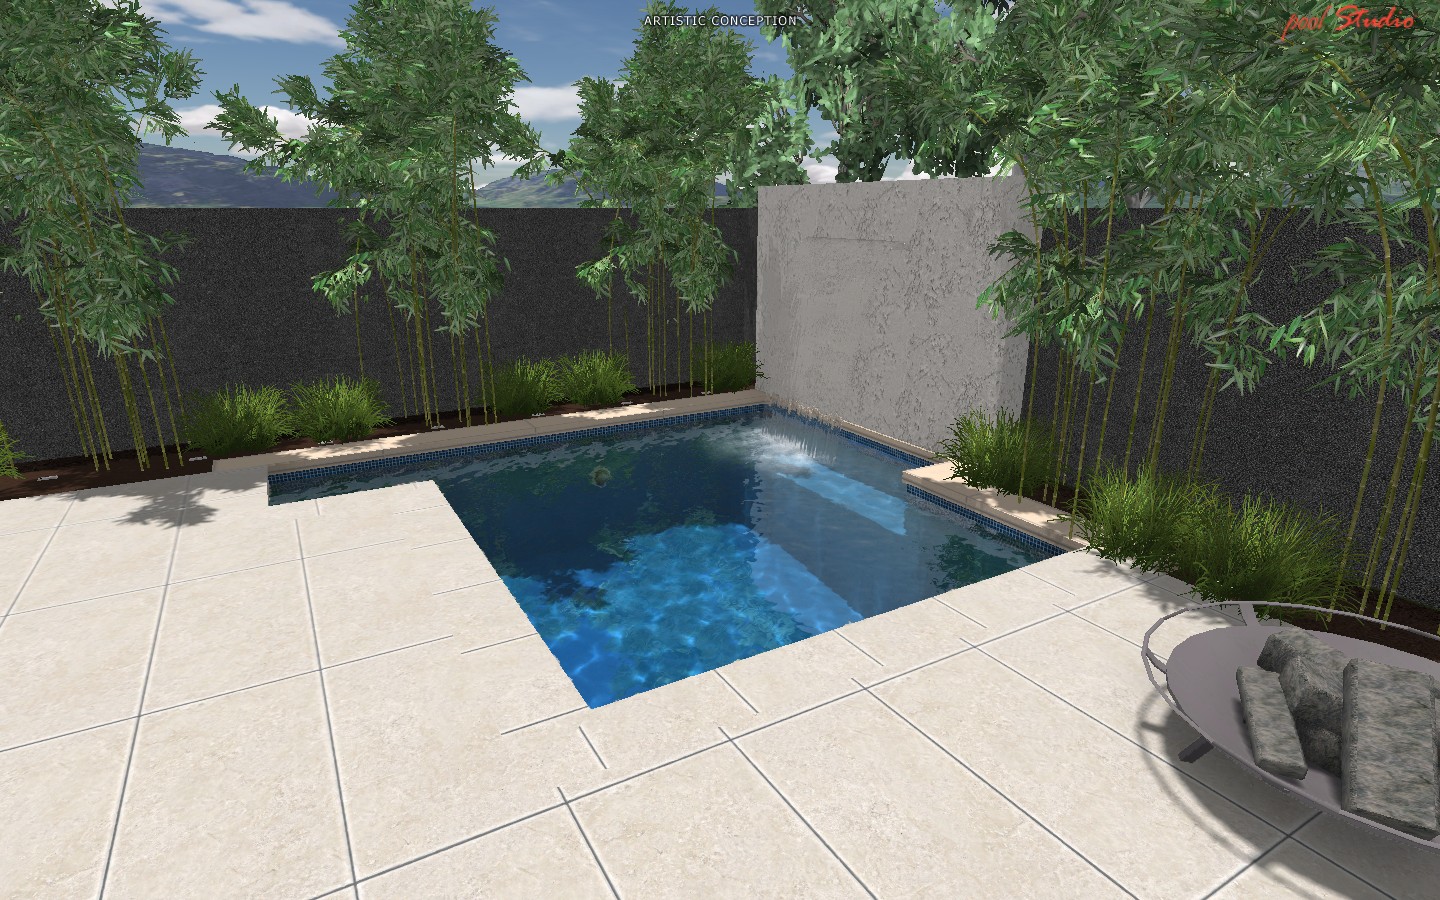 Modern Small Swimming Pool Desig Ideas With Style Fence And Green Plant Modern Floor Ideas Pure Water Clear Sky Good View And Cool Shapes For Exterior Concept Pool Pool Design